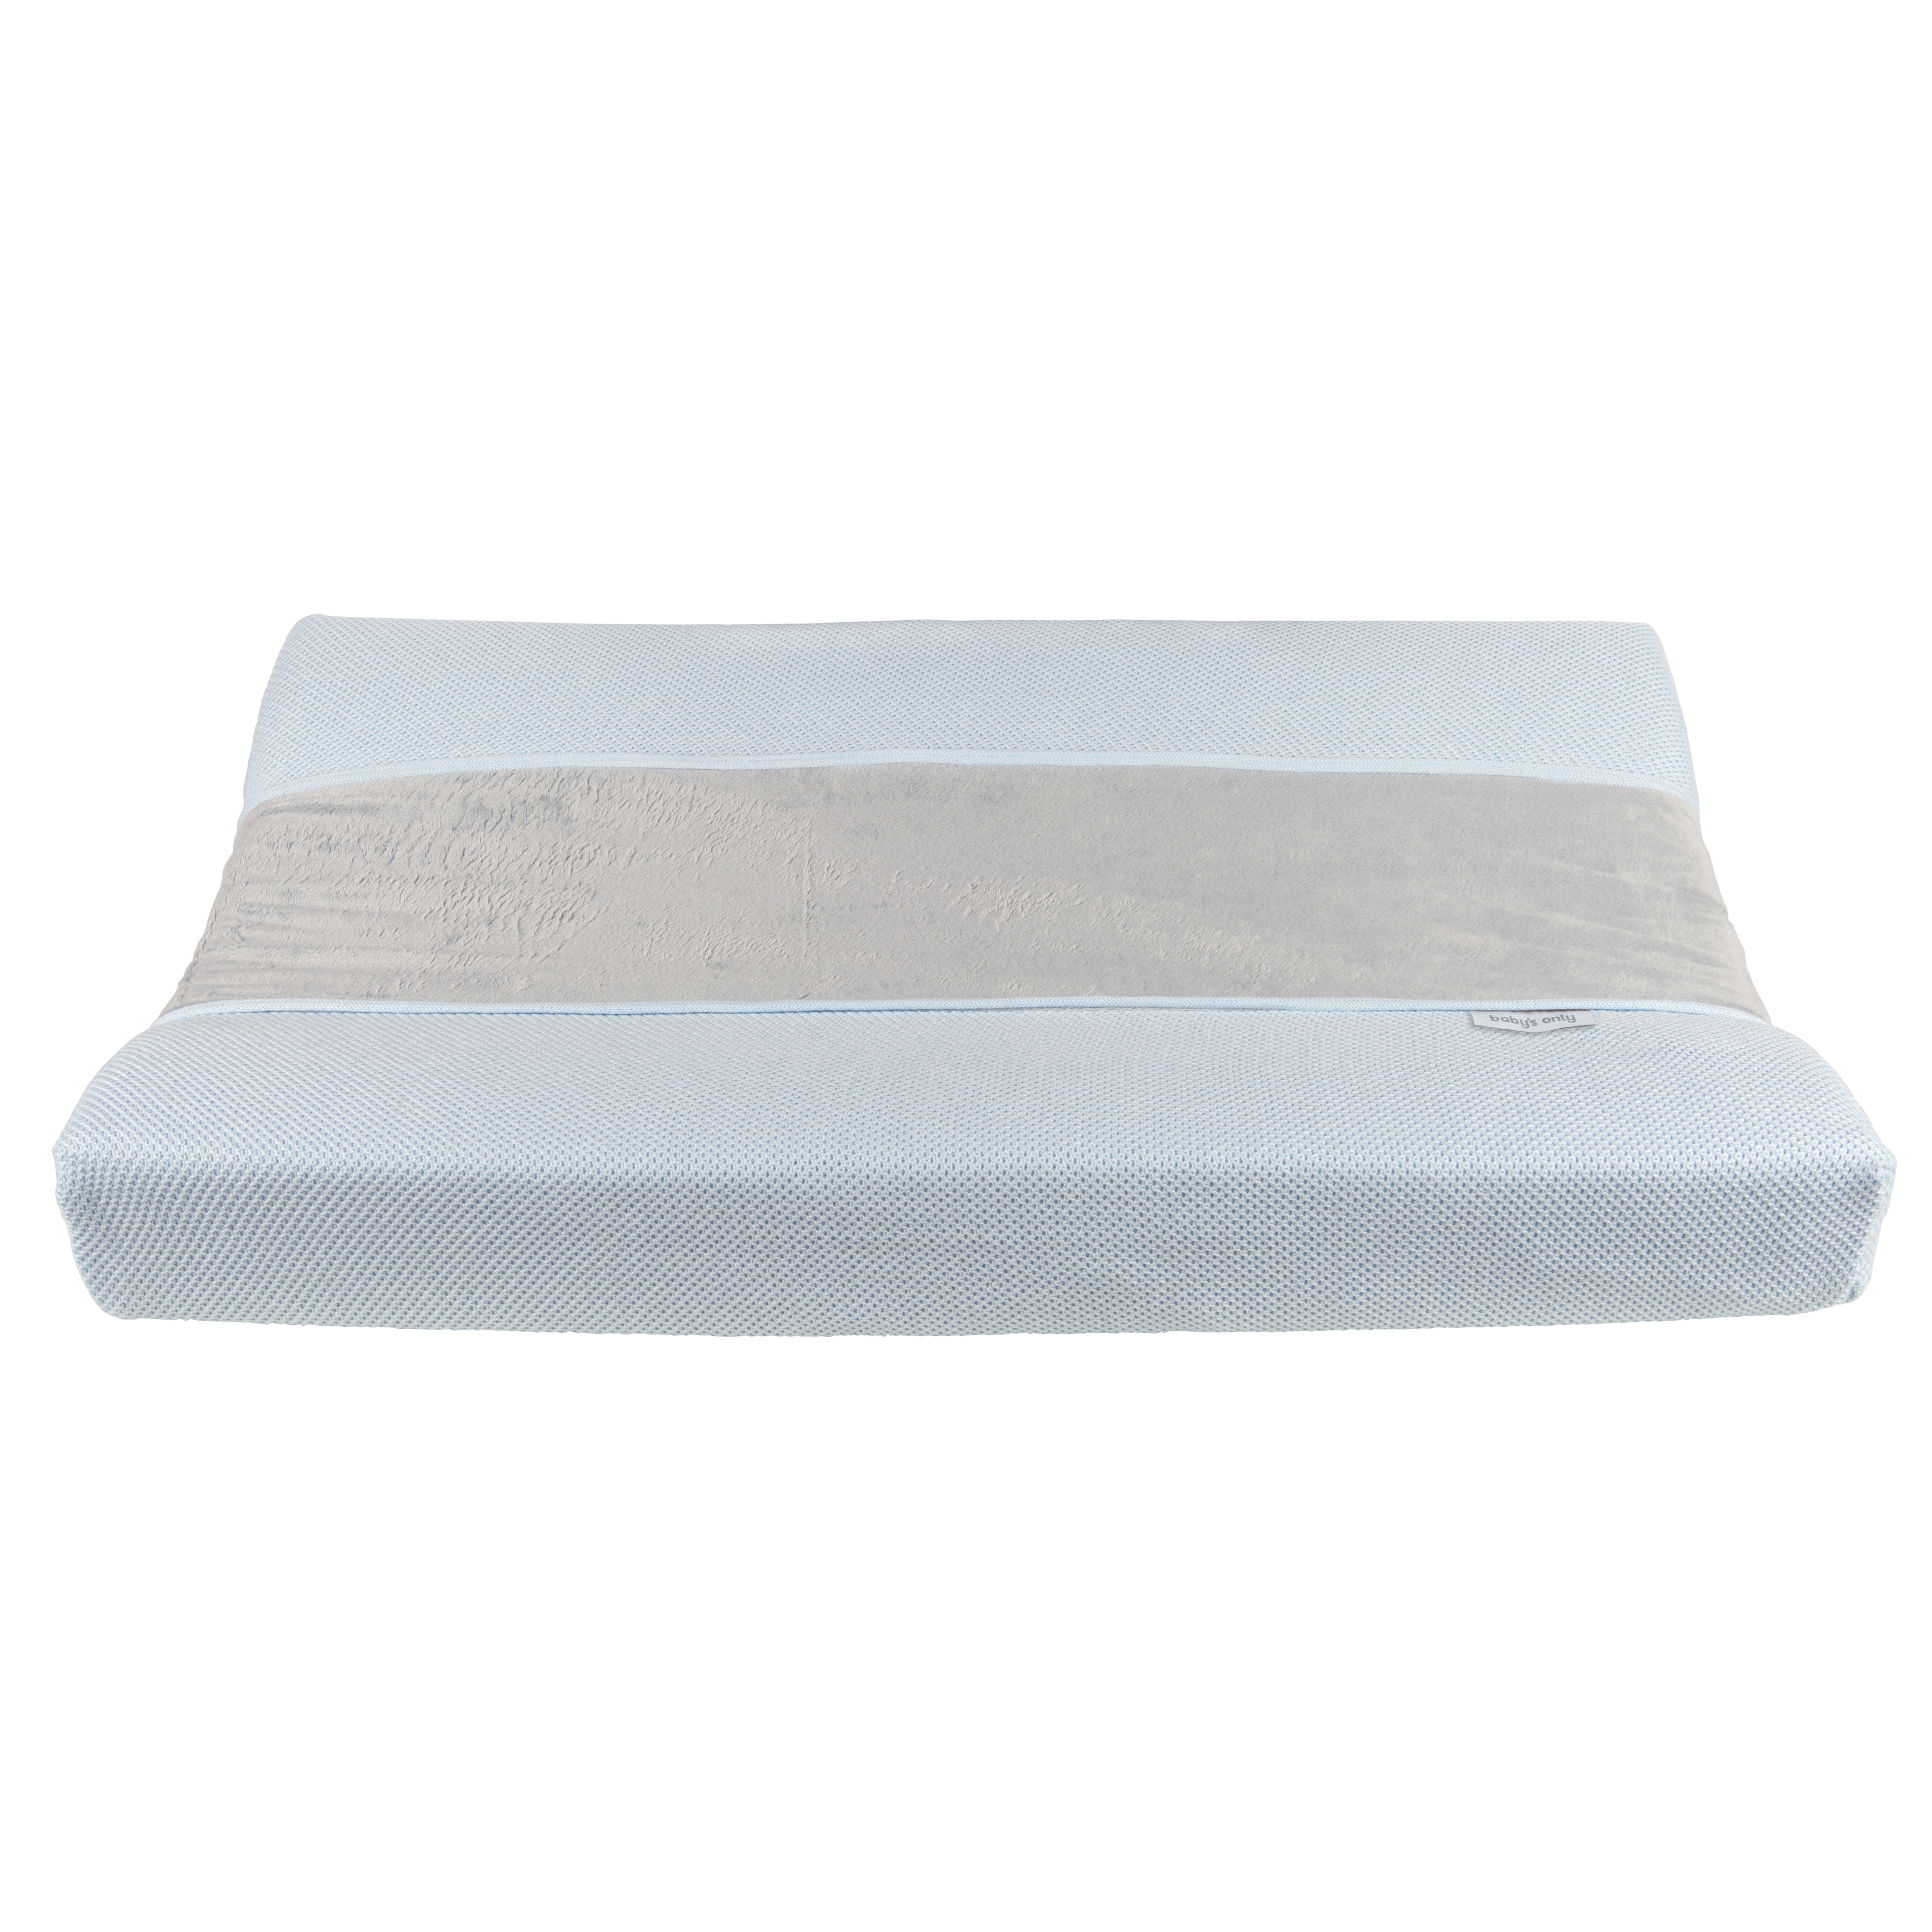 Changing pad cover Classic powder blue - 45x70